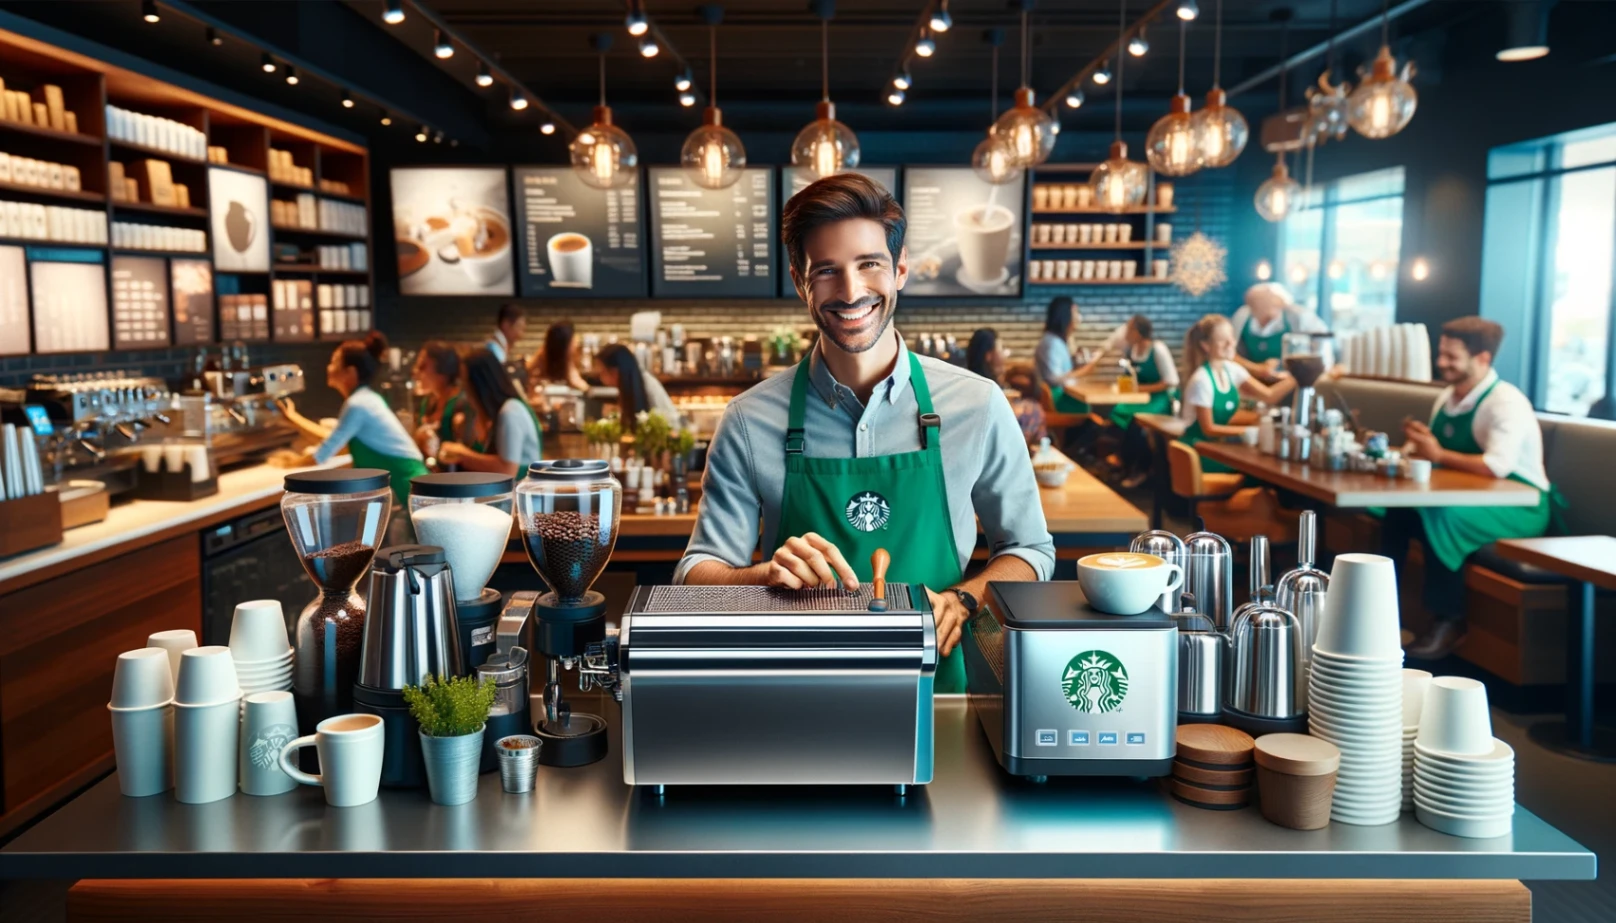 Jobs at Starbucks: Discover How to Easily Apply